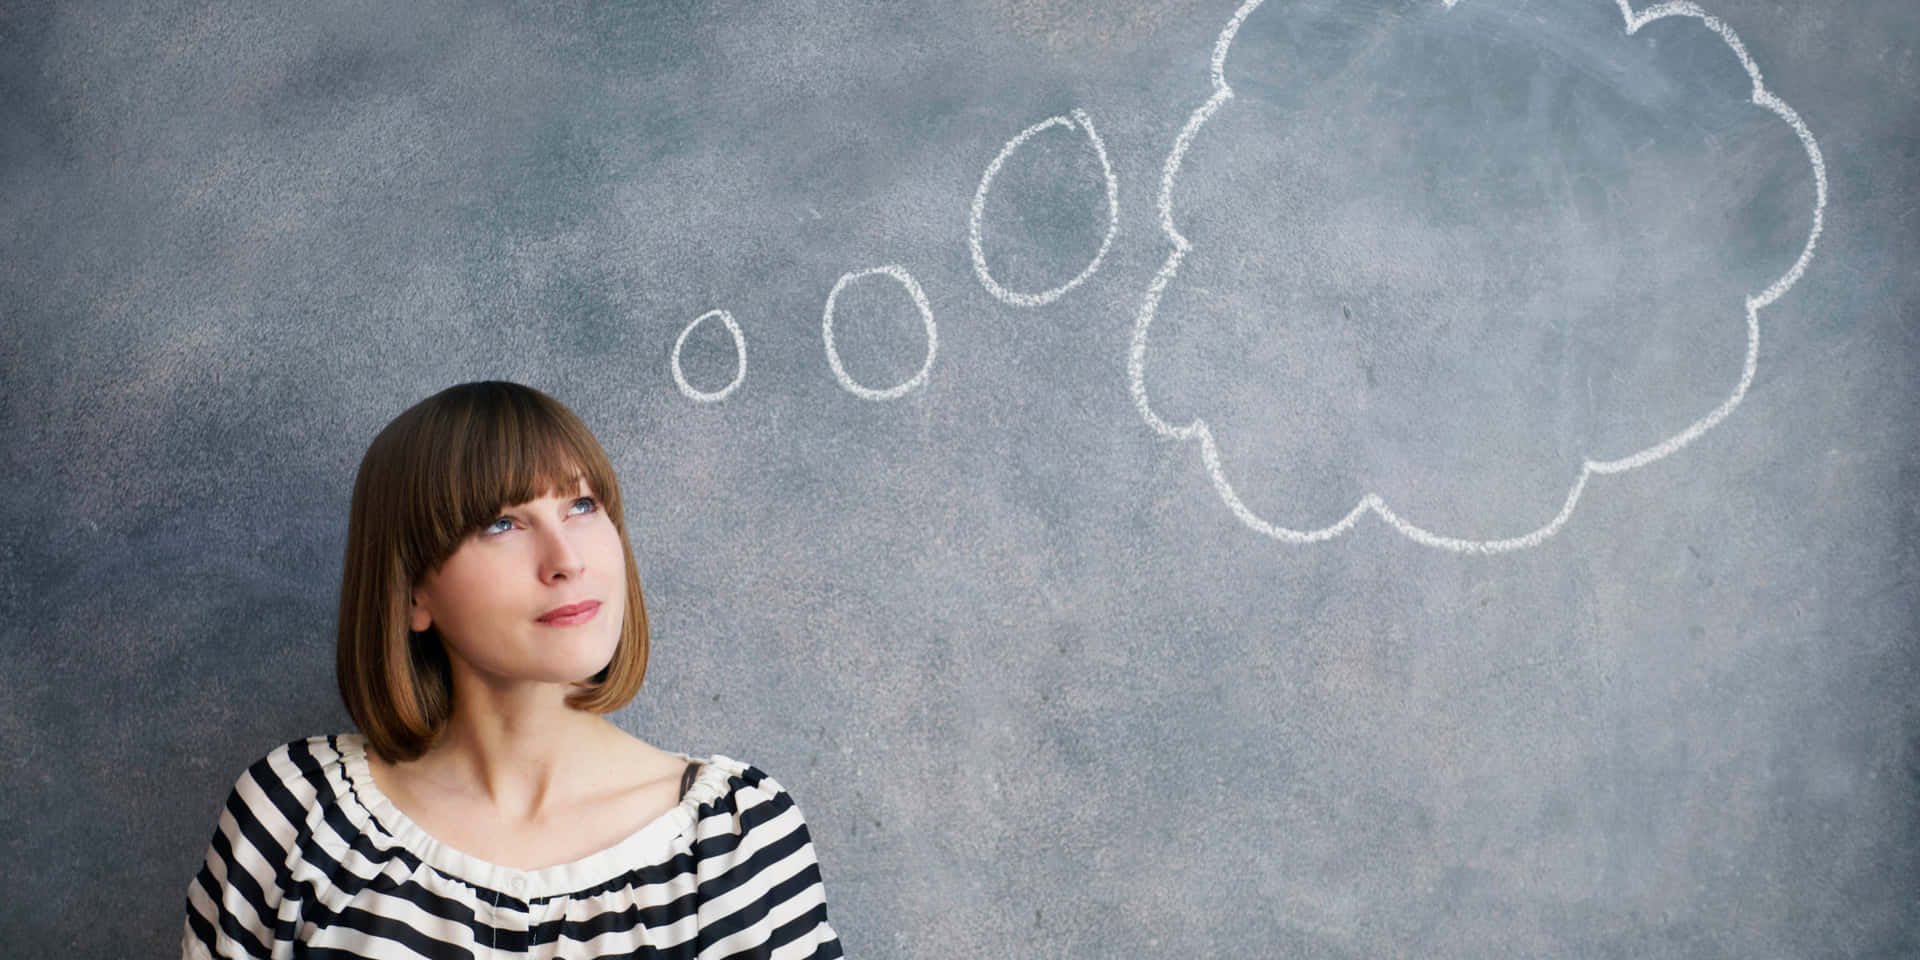 Young Woman Thinking With Thought Bubble Over Chalkboard